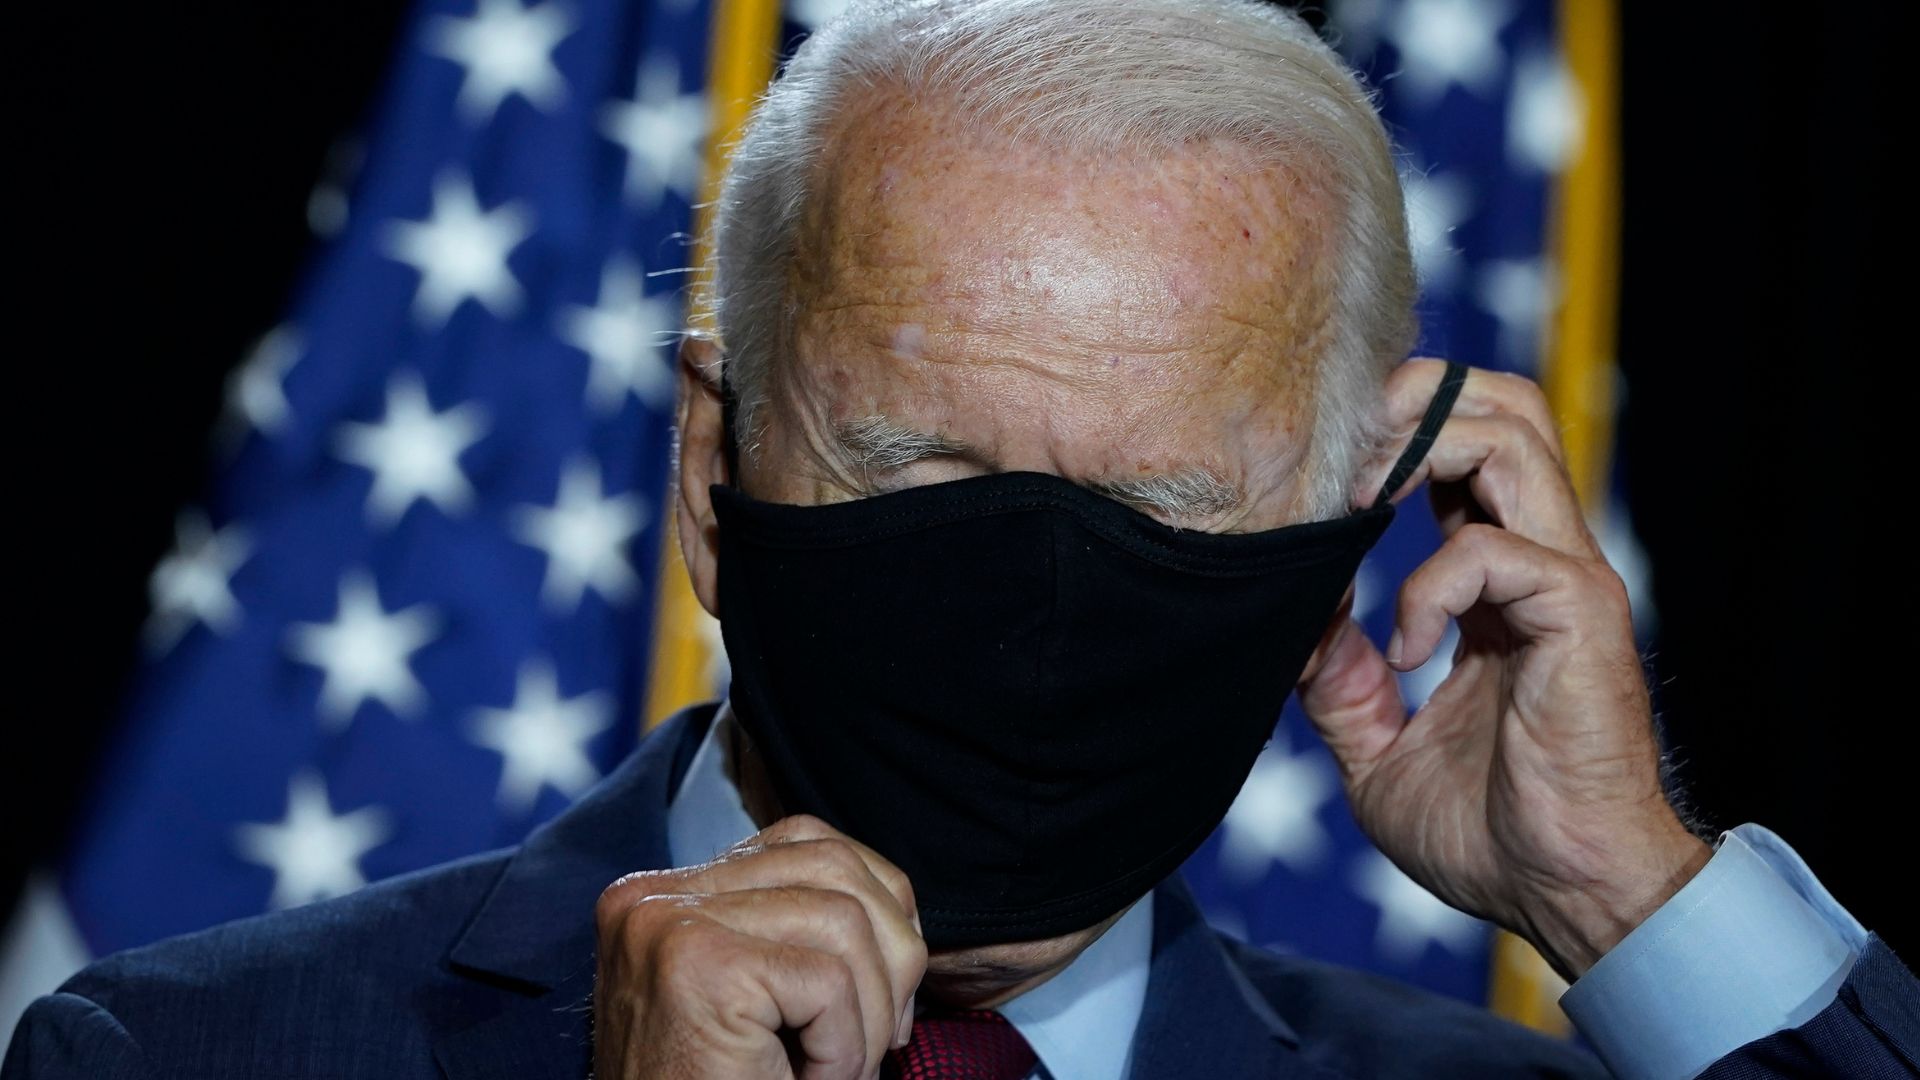 White House: Biden to Readopt Masks and Social Distancing